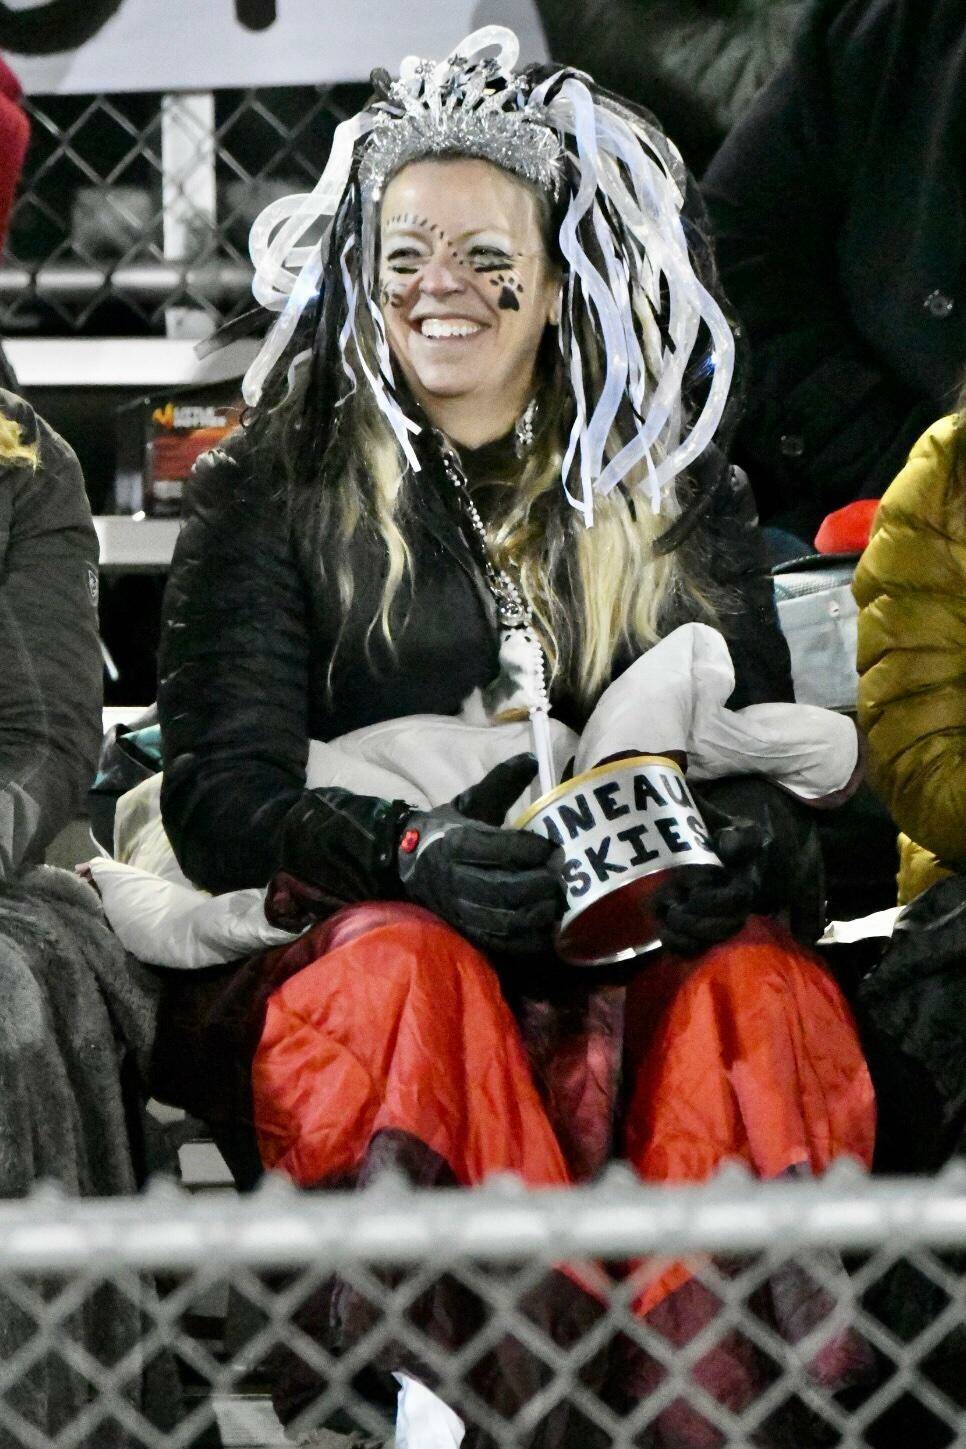 Judy Campbell, mother of Huskies lineman Brandon Campbell, smiles in the stands. The Juneau faithful who traveled to Anchorage were boisterous throughout the 2021 Alaska School Activities Association First National Bowl Series Division I game. (Courtesy Photo / Larry Schrader)